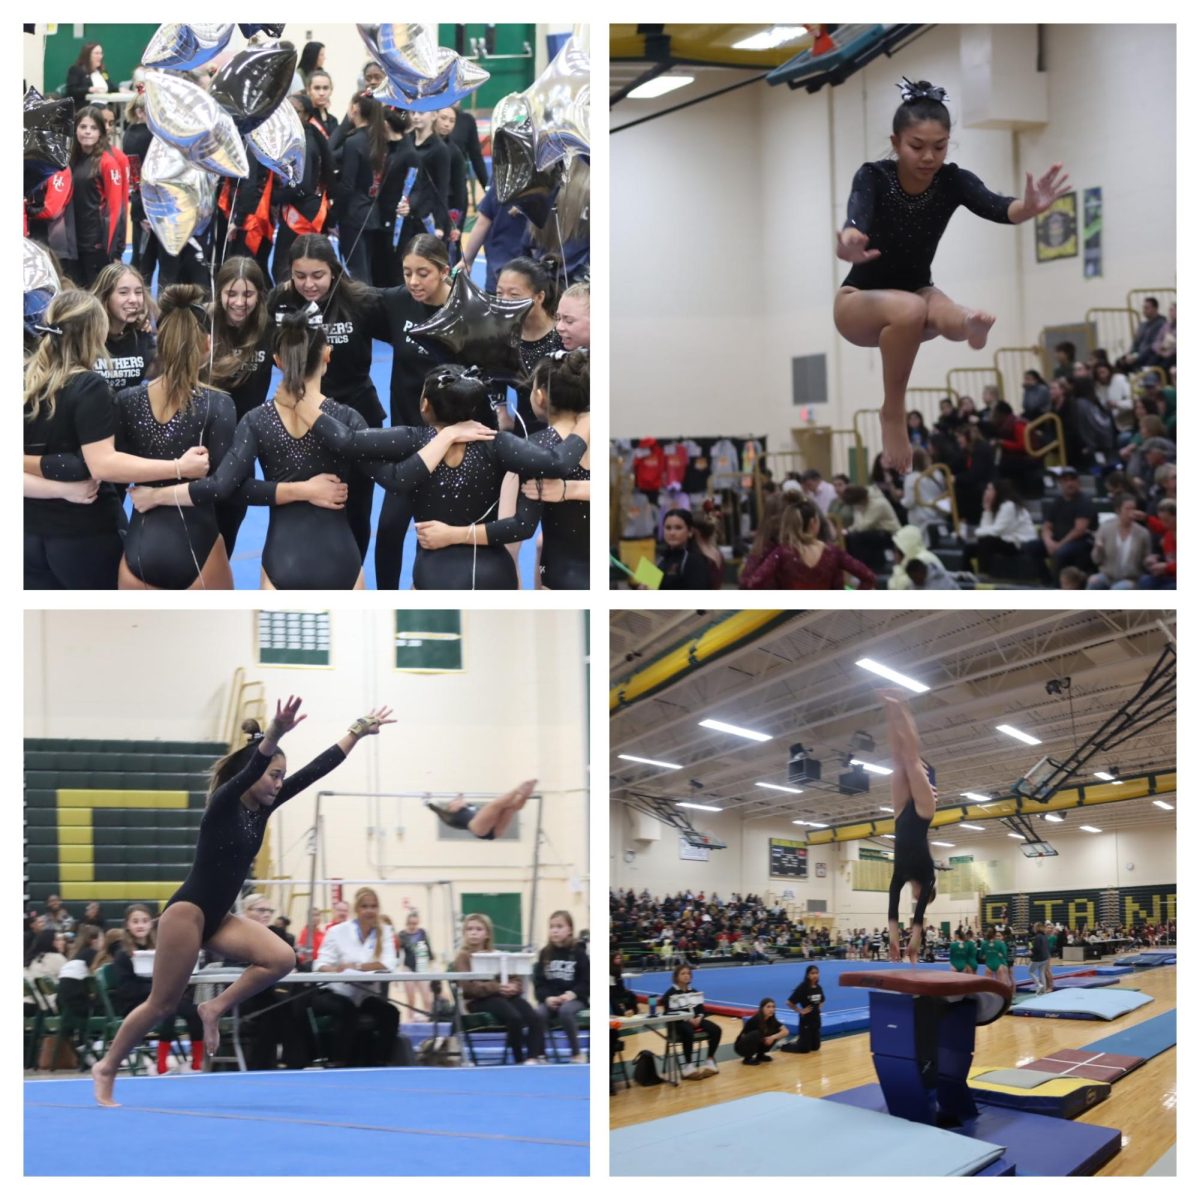 High+school+gymnastics+team+placed+fifth+in+state+championship+meet